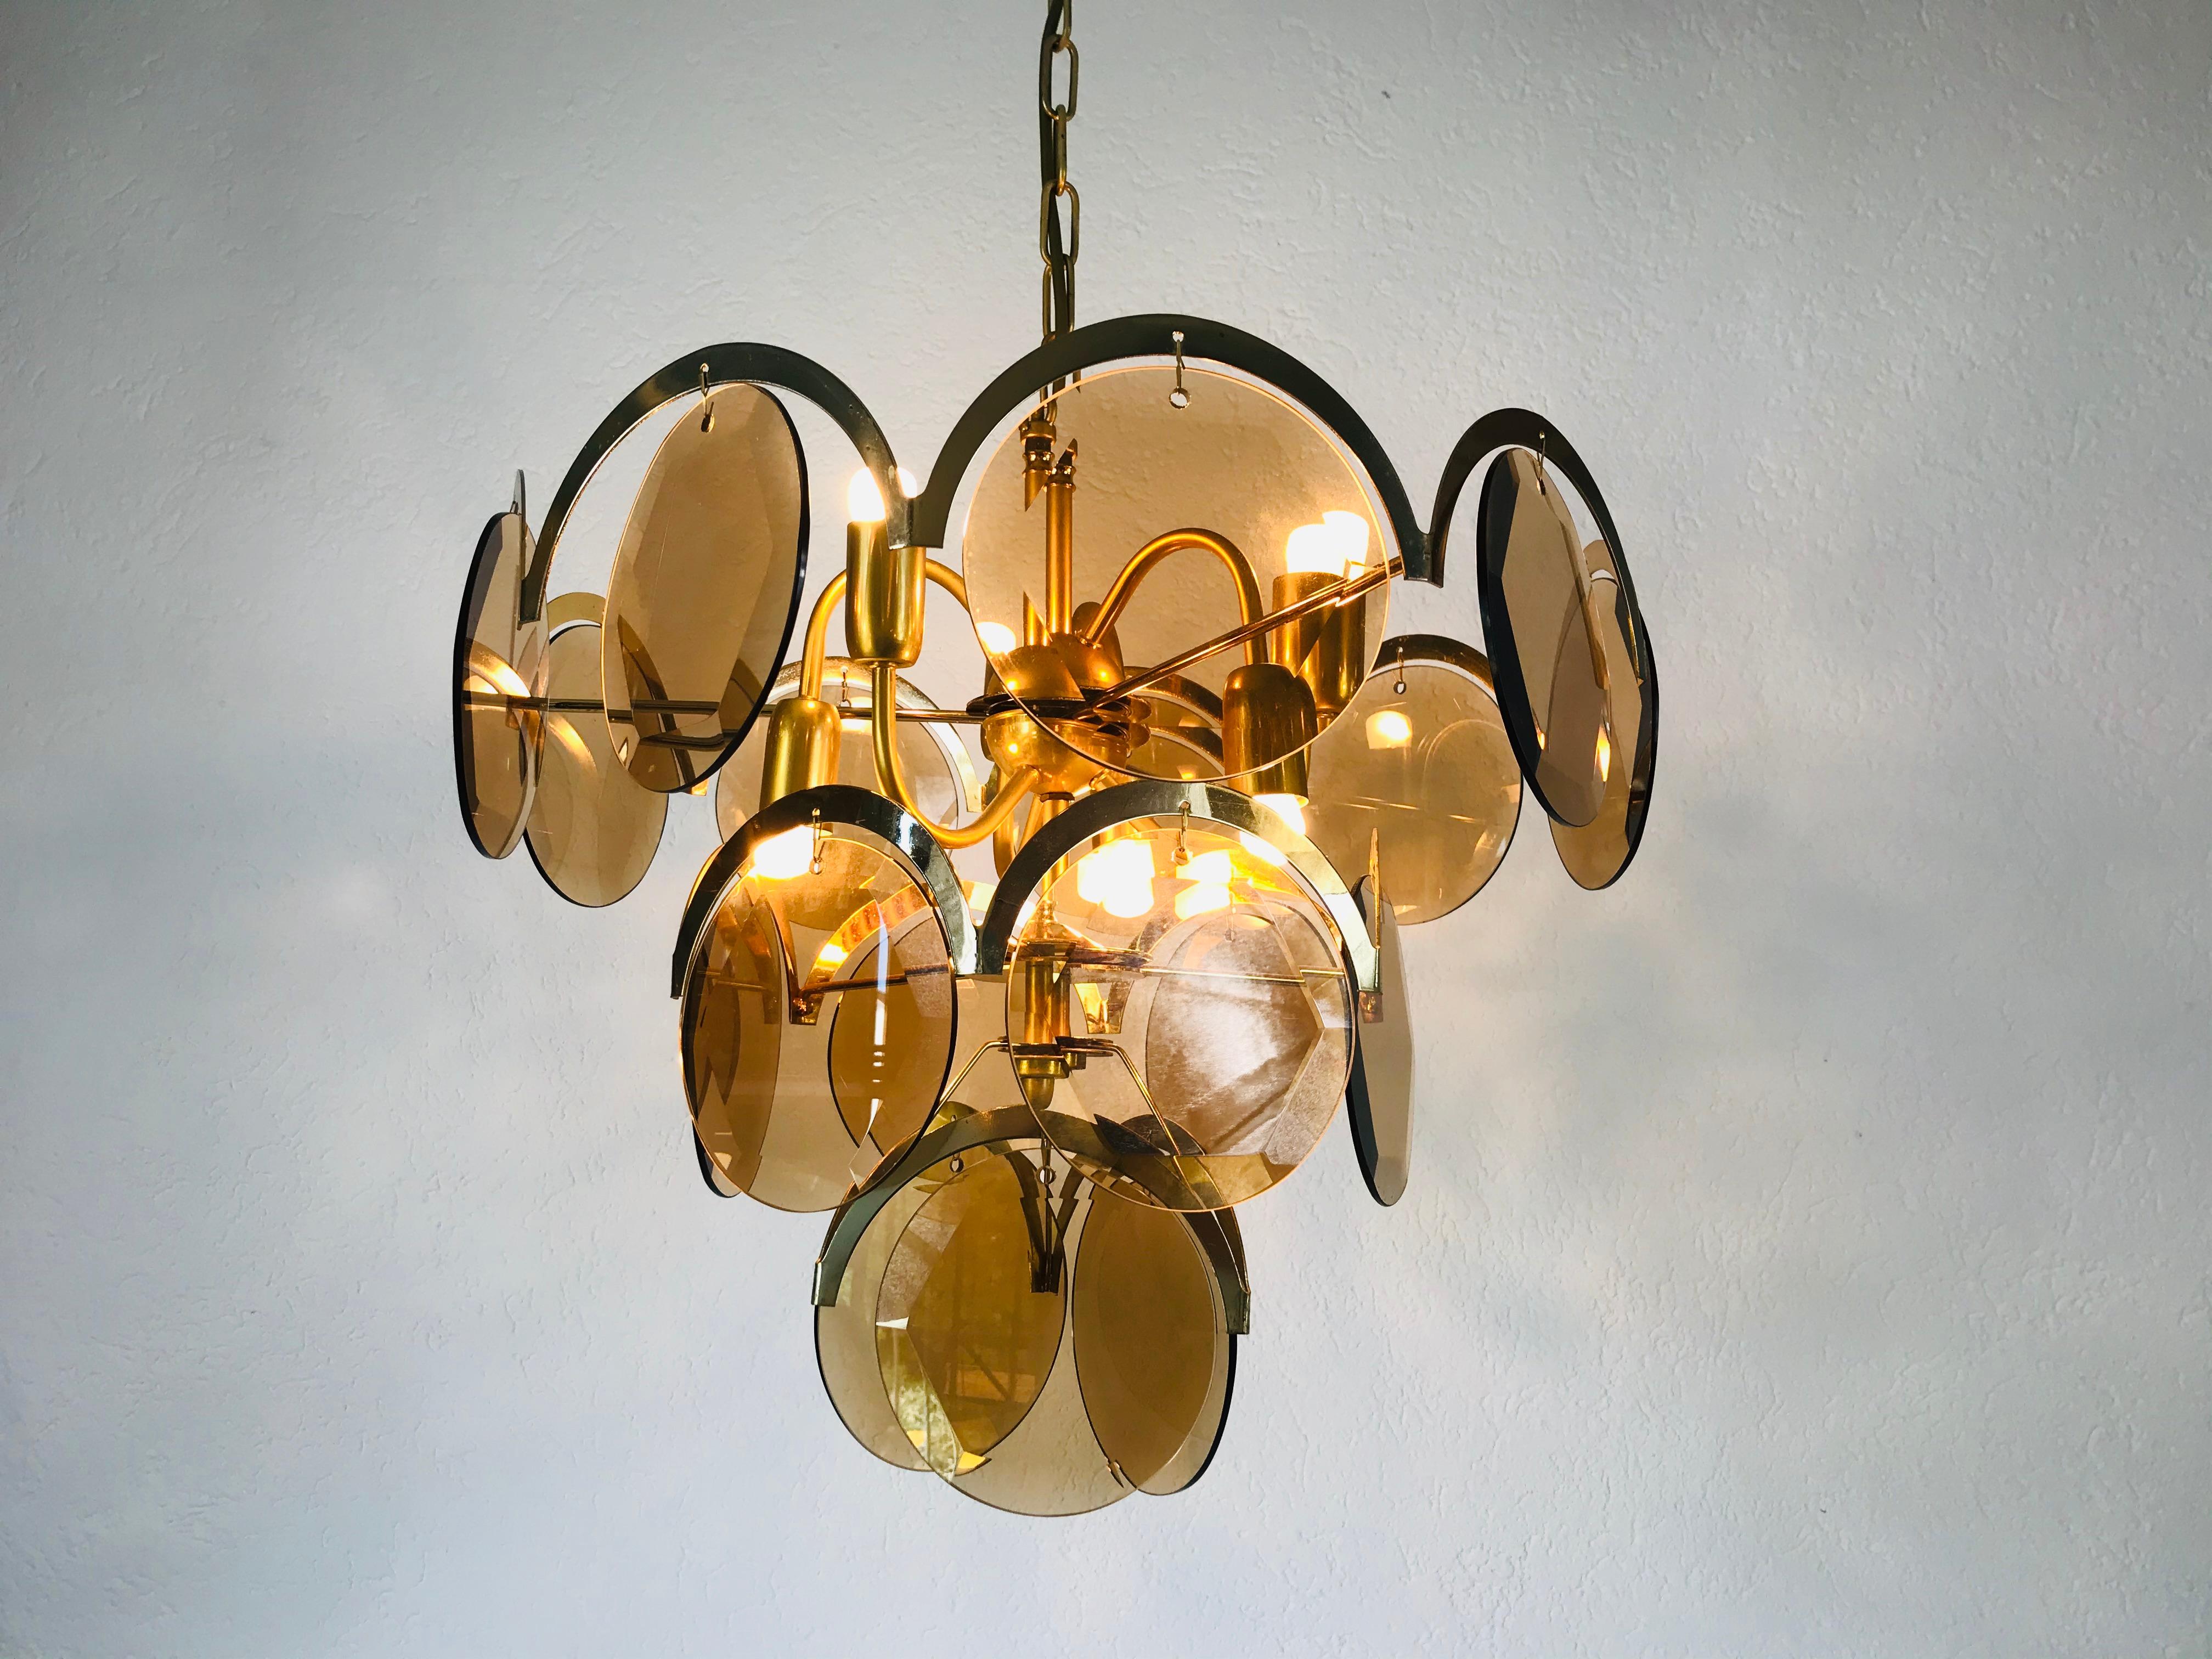 Mid-Century Modern Midcentury Three-Tier Brass and Glass Chandelier by Vistosi, 1960s For Sale